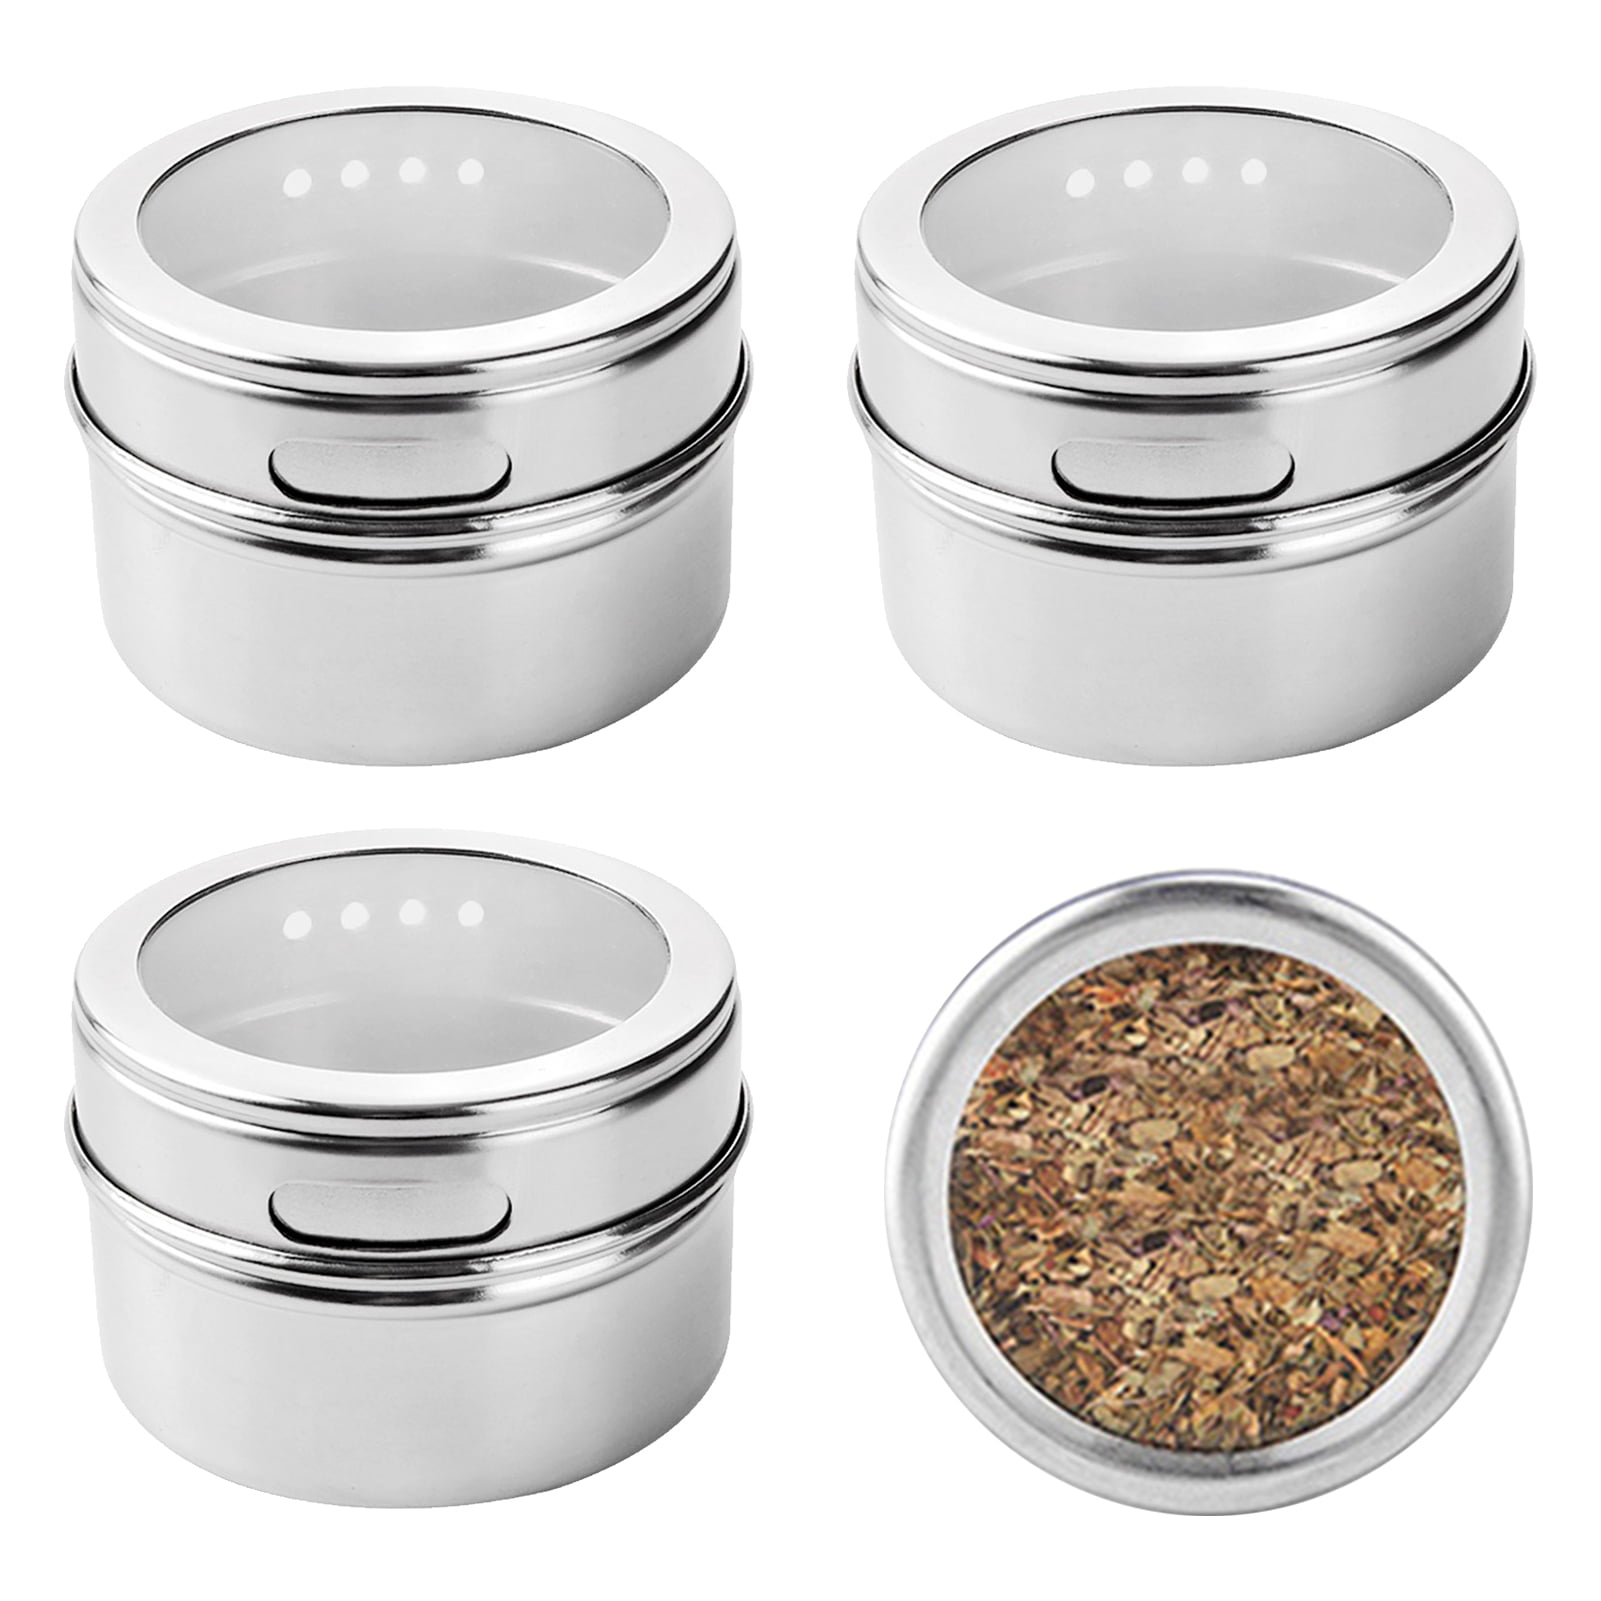 Magnetic Storage Containers Stick on Refrigerator and Grill 12 Pack Spice Jars with Tray Stainless Steel Spice Tin for Herbs and Spices 